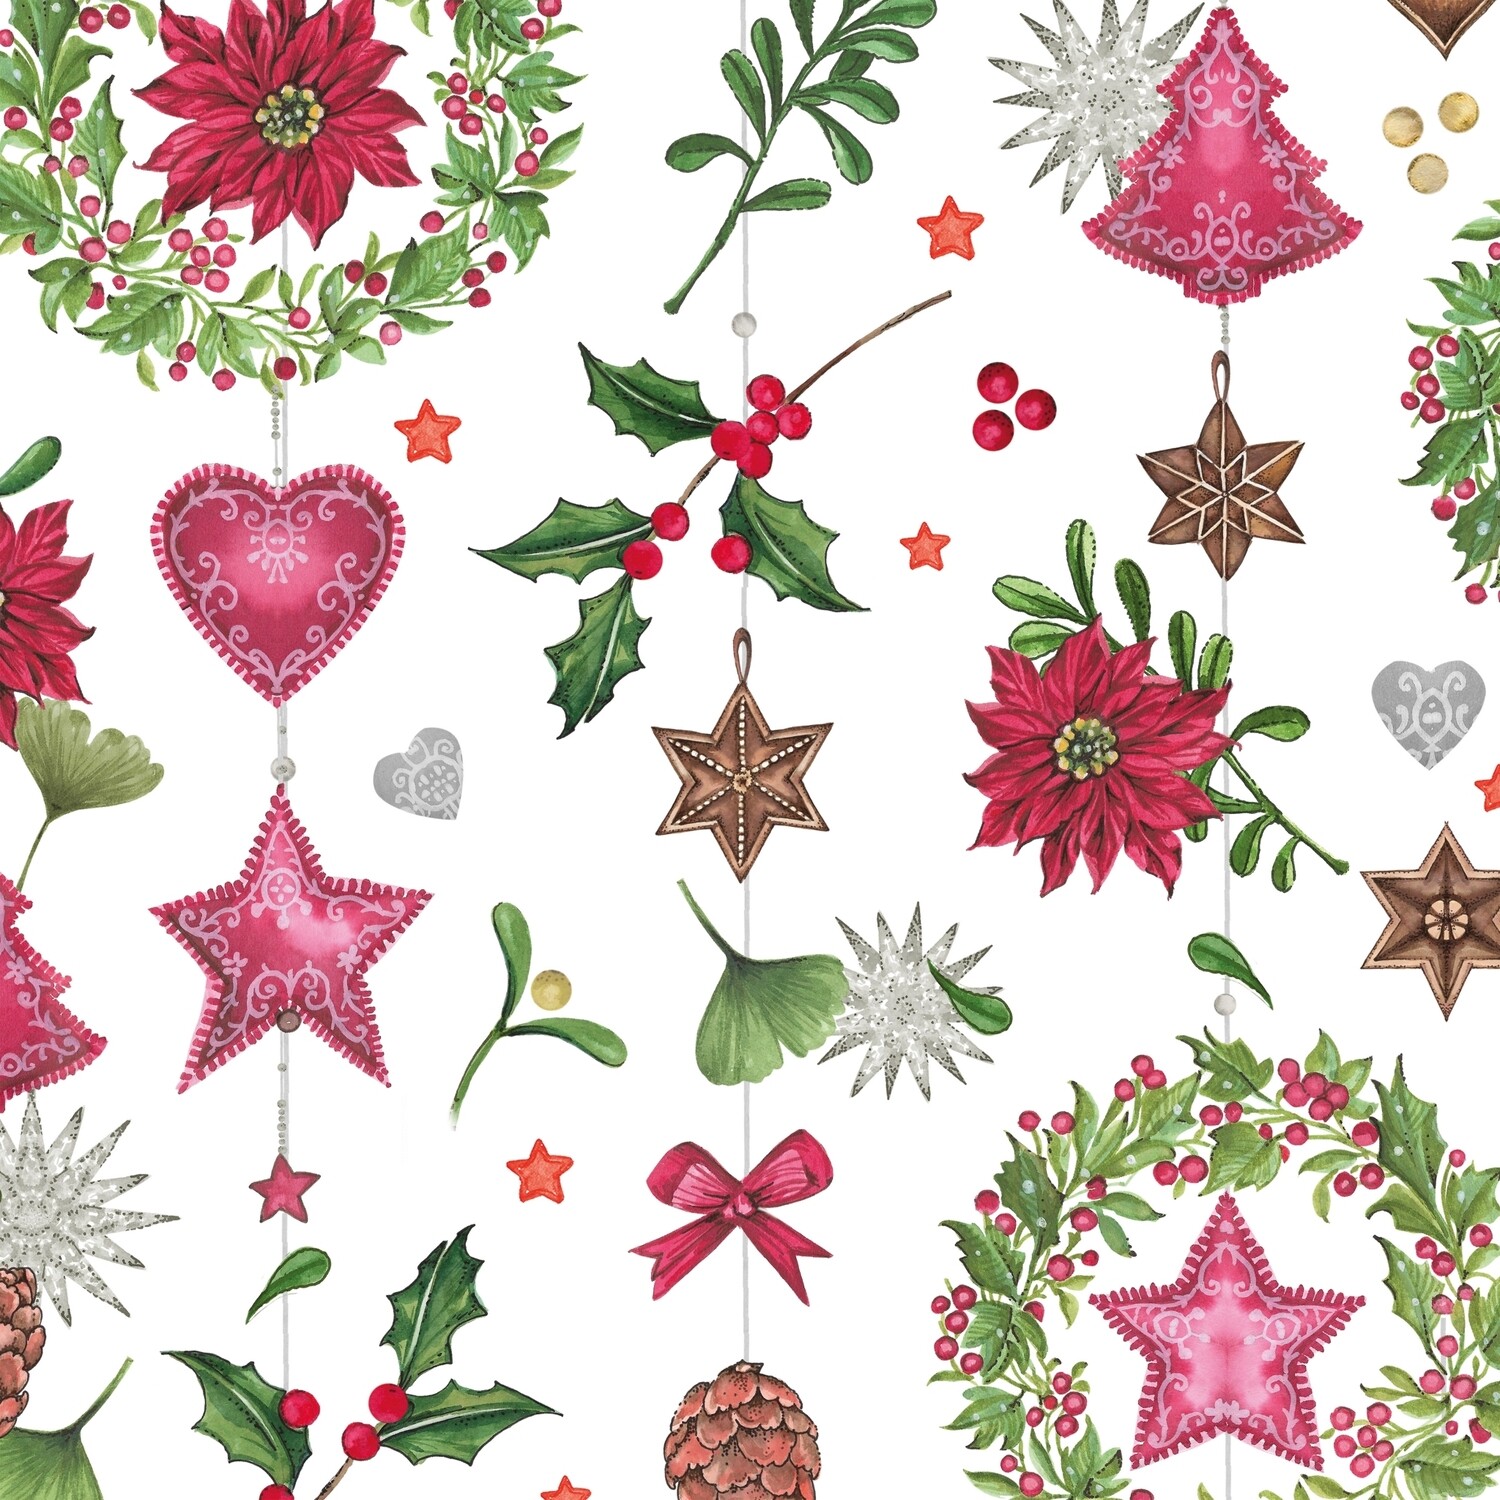 Decoupage Paper Napkins - Christmas/Xmas - Cozy Home (1 Sheet) Out of Stock